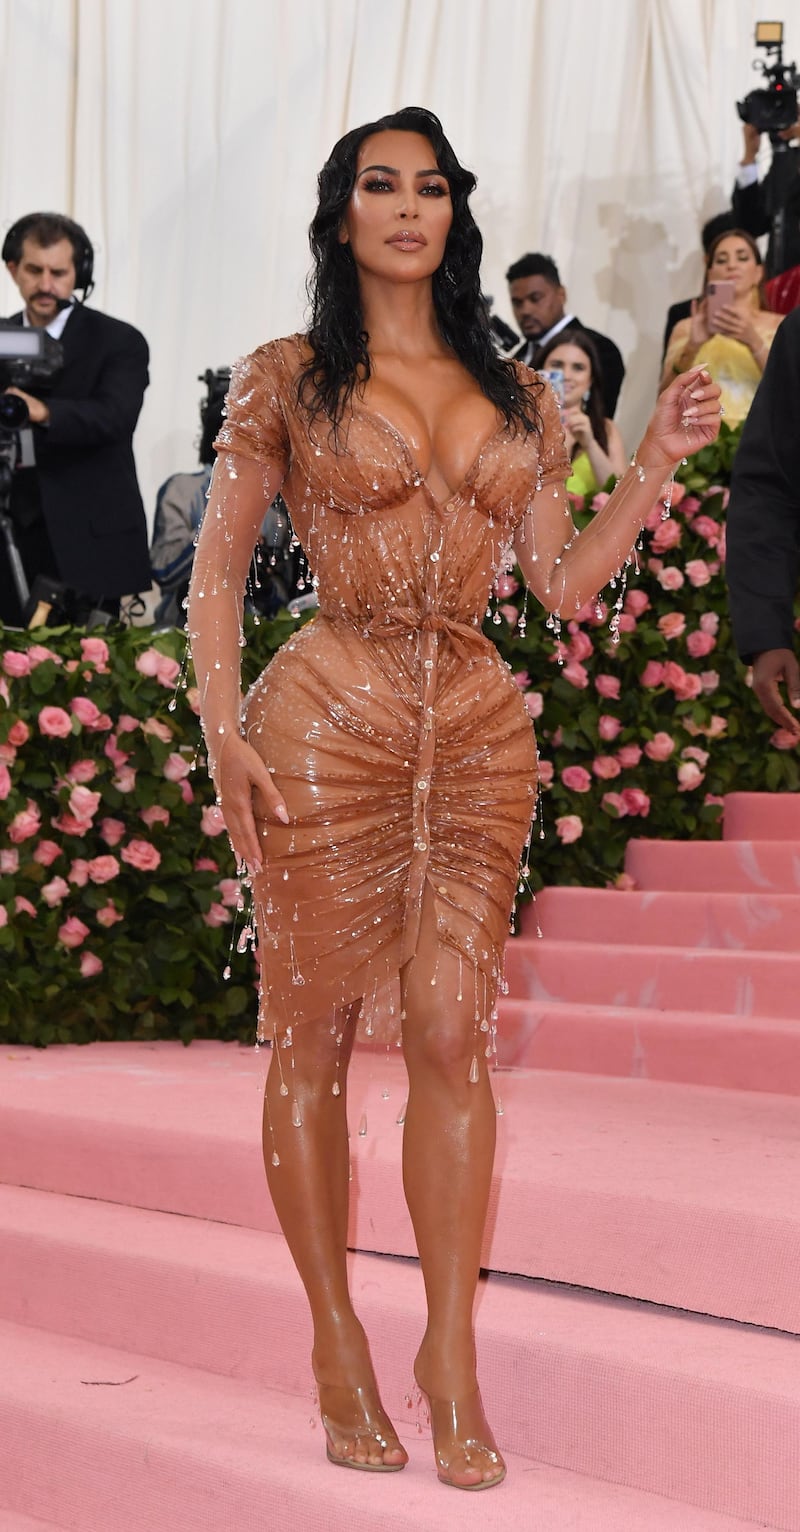 Kim Kardashian arrives at the 2019 Met Gala in New York on May 6. AFP